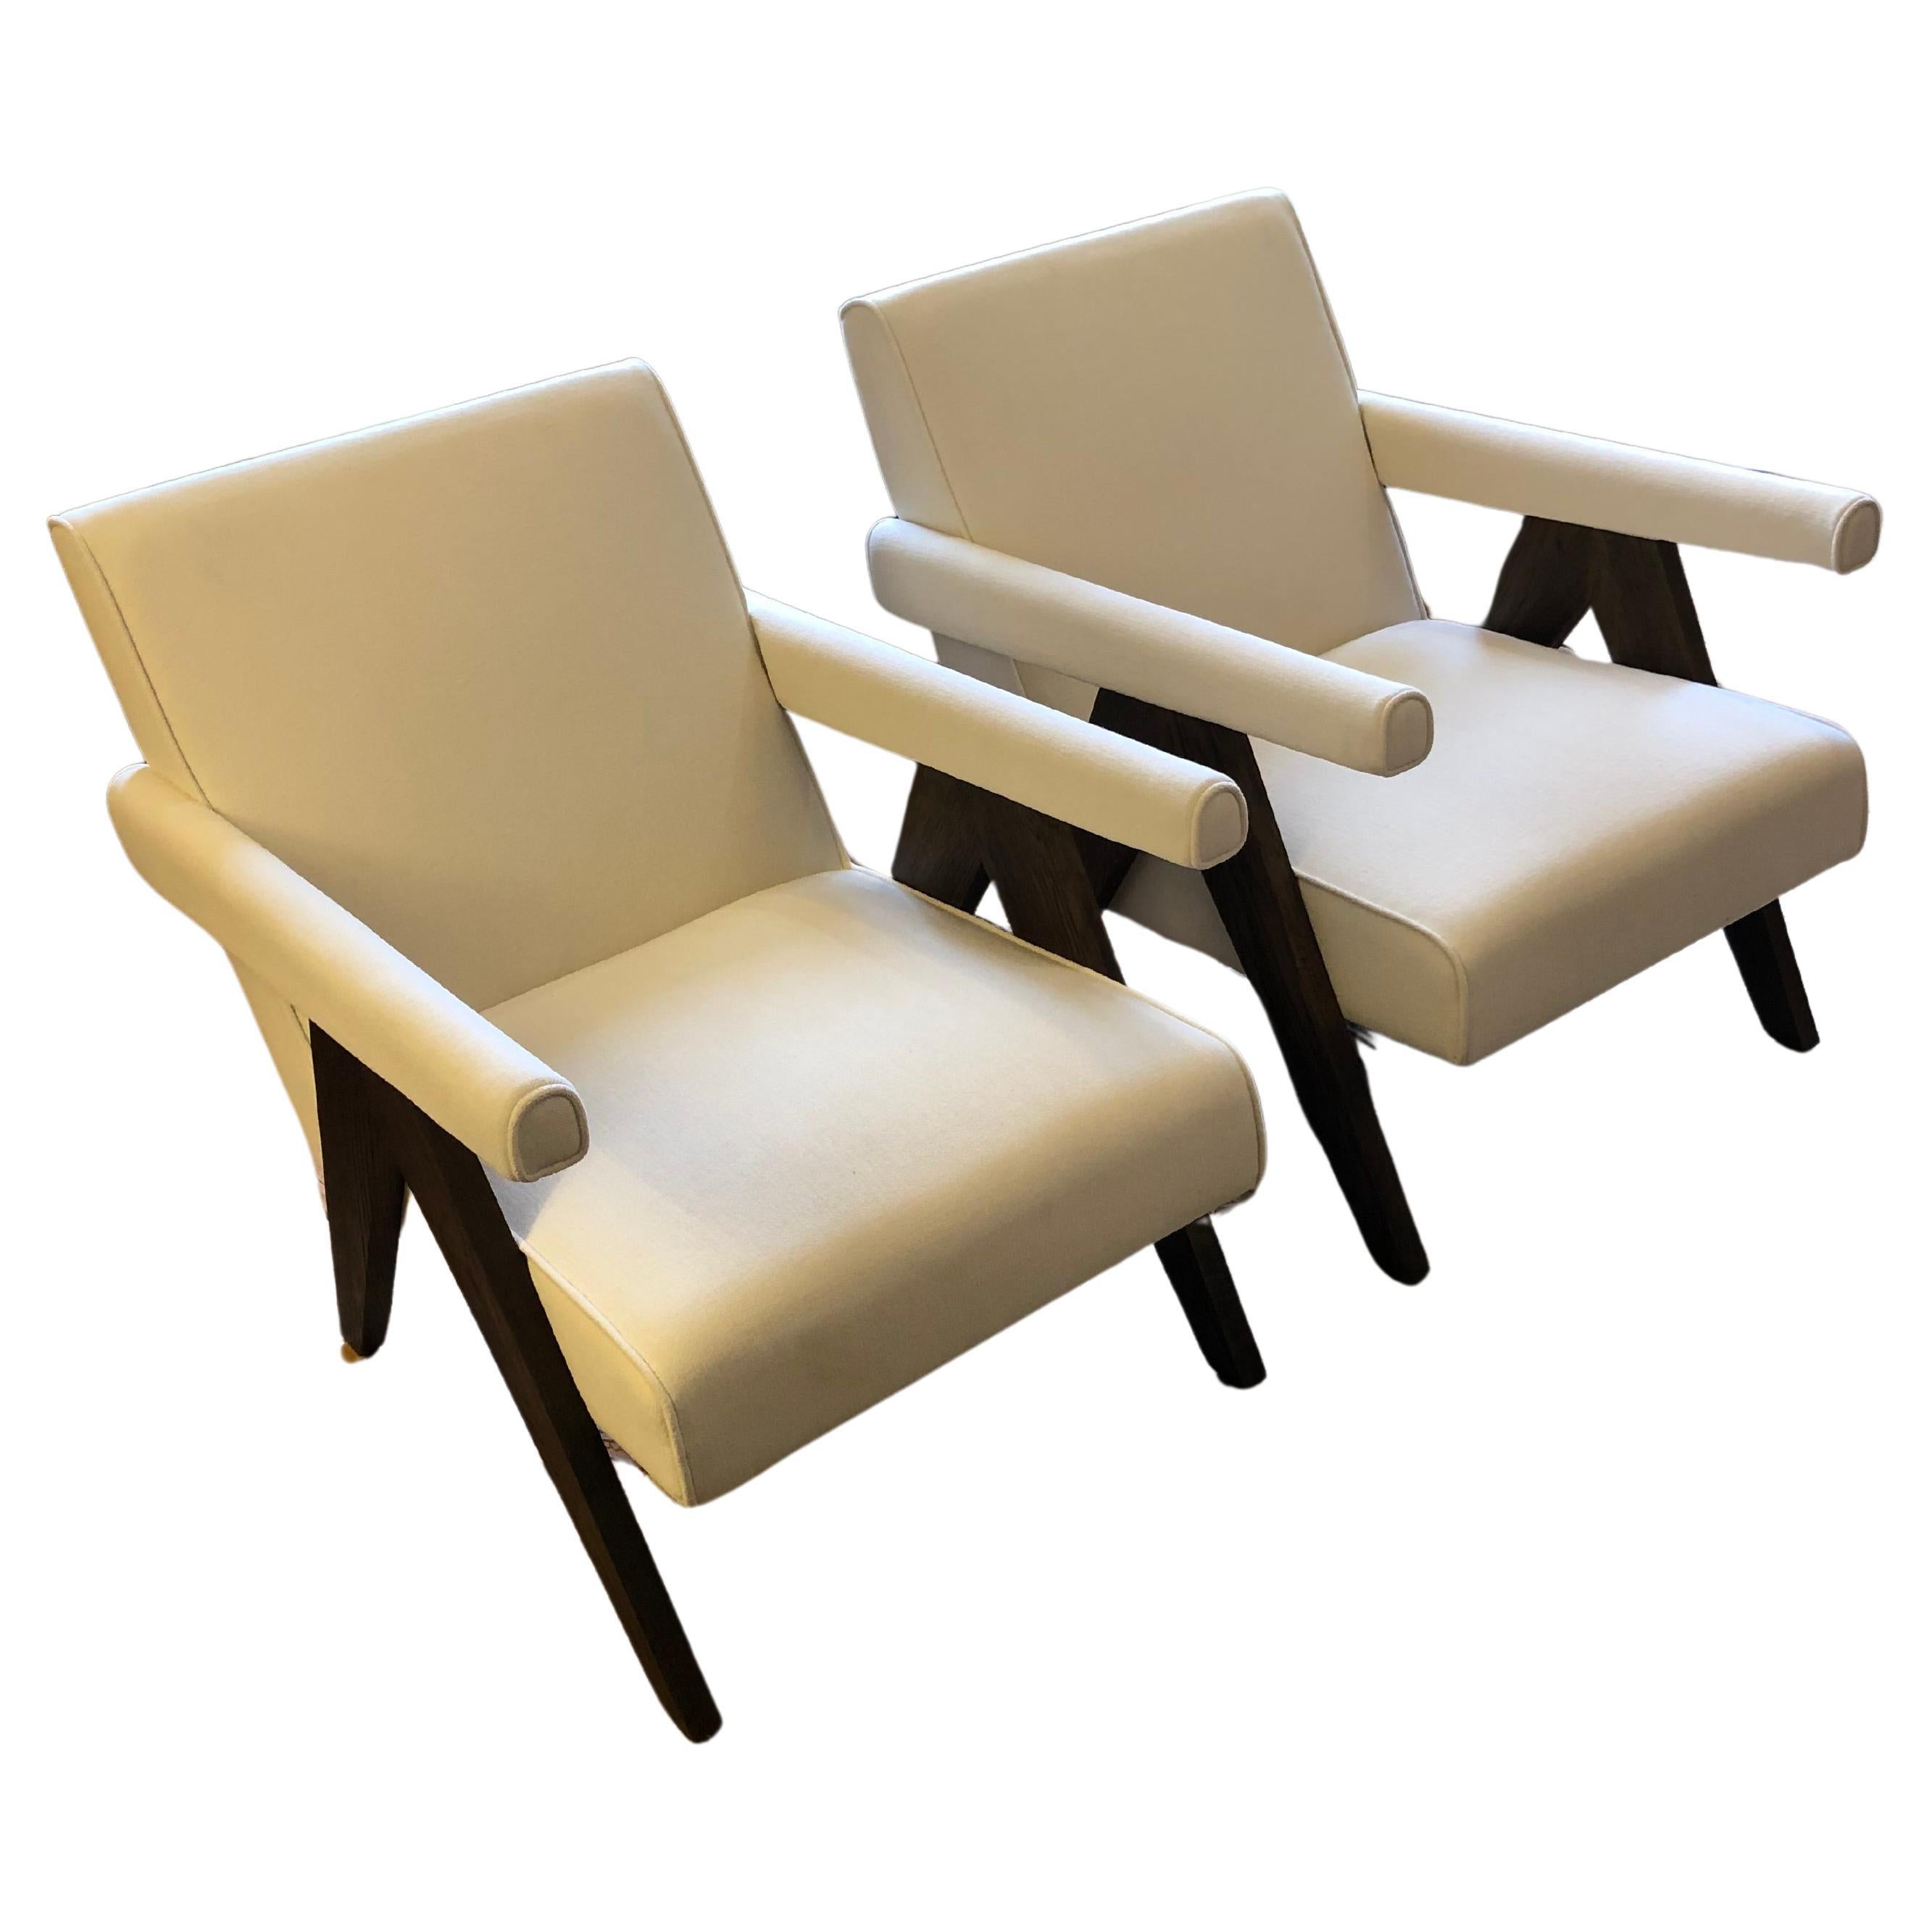 Sleek Sophisticated Upholstered Club Chairs with Walnut Legs